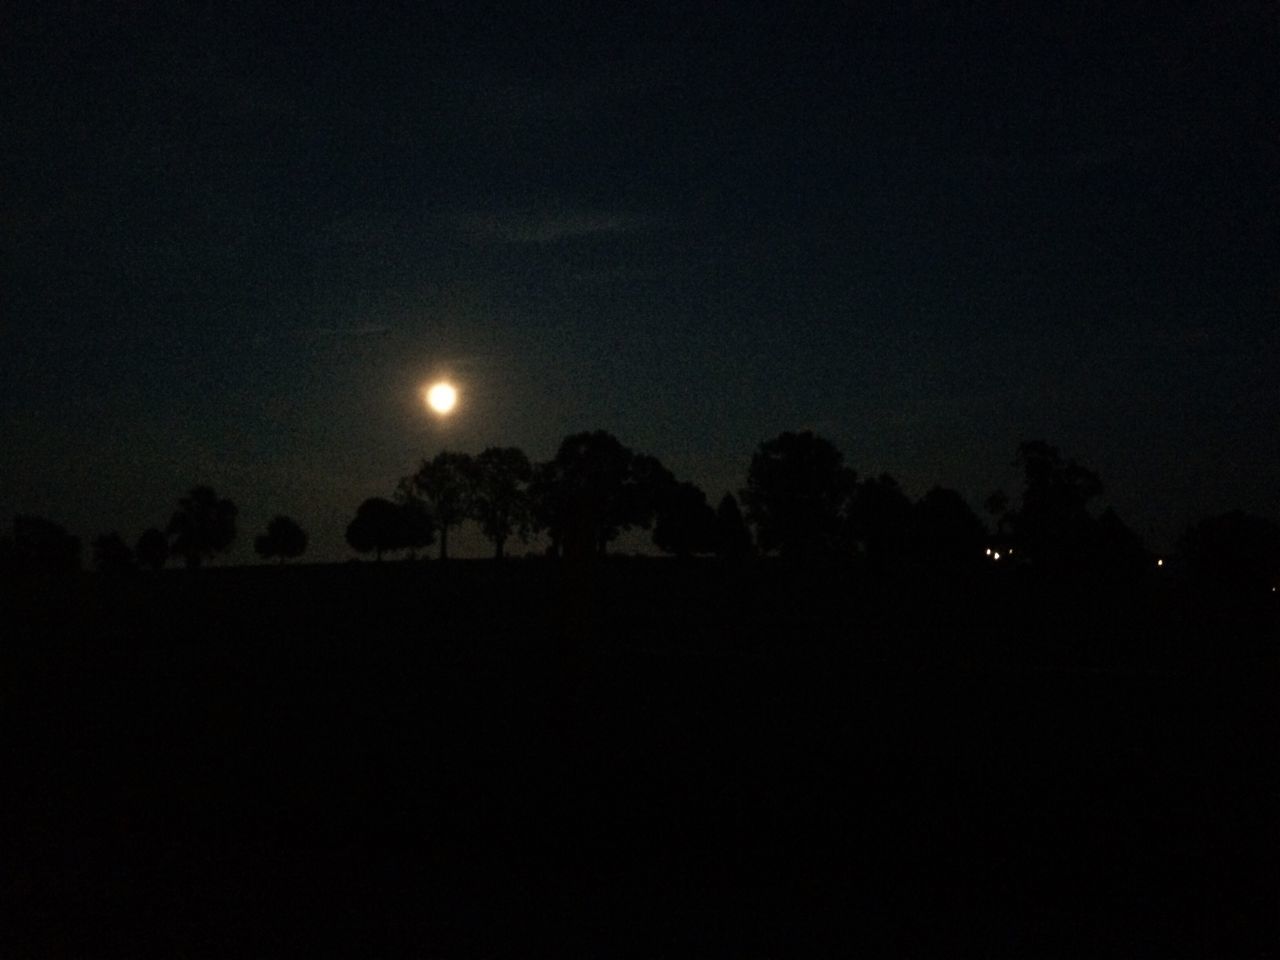 silhouette, tranquil scene, tree, night, tranquility, scenics, moon, landscape, dark, outline, beauty in nature, solitude, nature, remote, full moon, glowing, majestic, calm, non-urban scene, countryside, cloud, outdoors, moonlight, sky, sun, exploration, no people, uncultivated